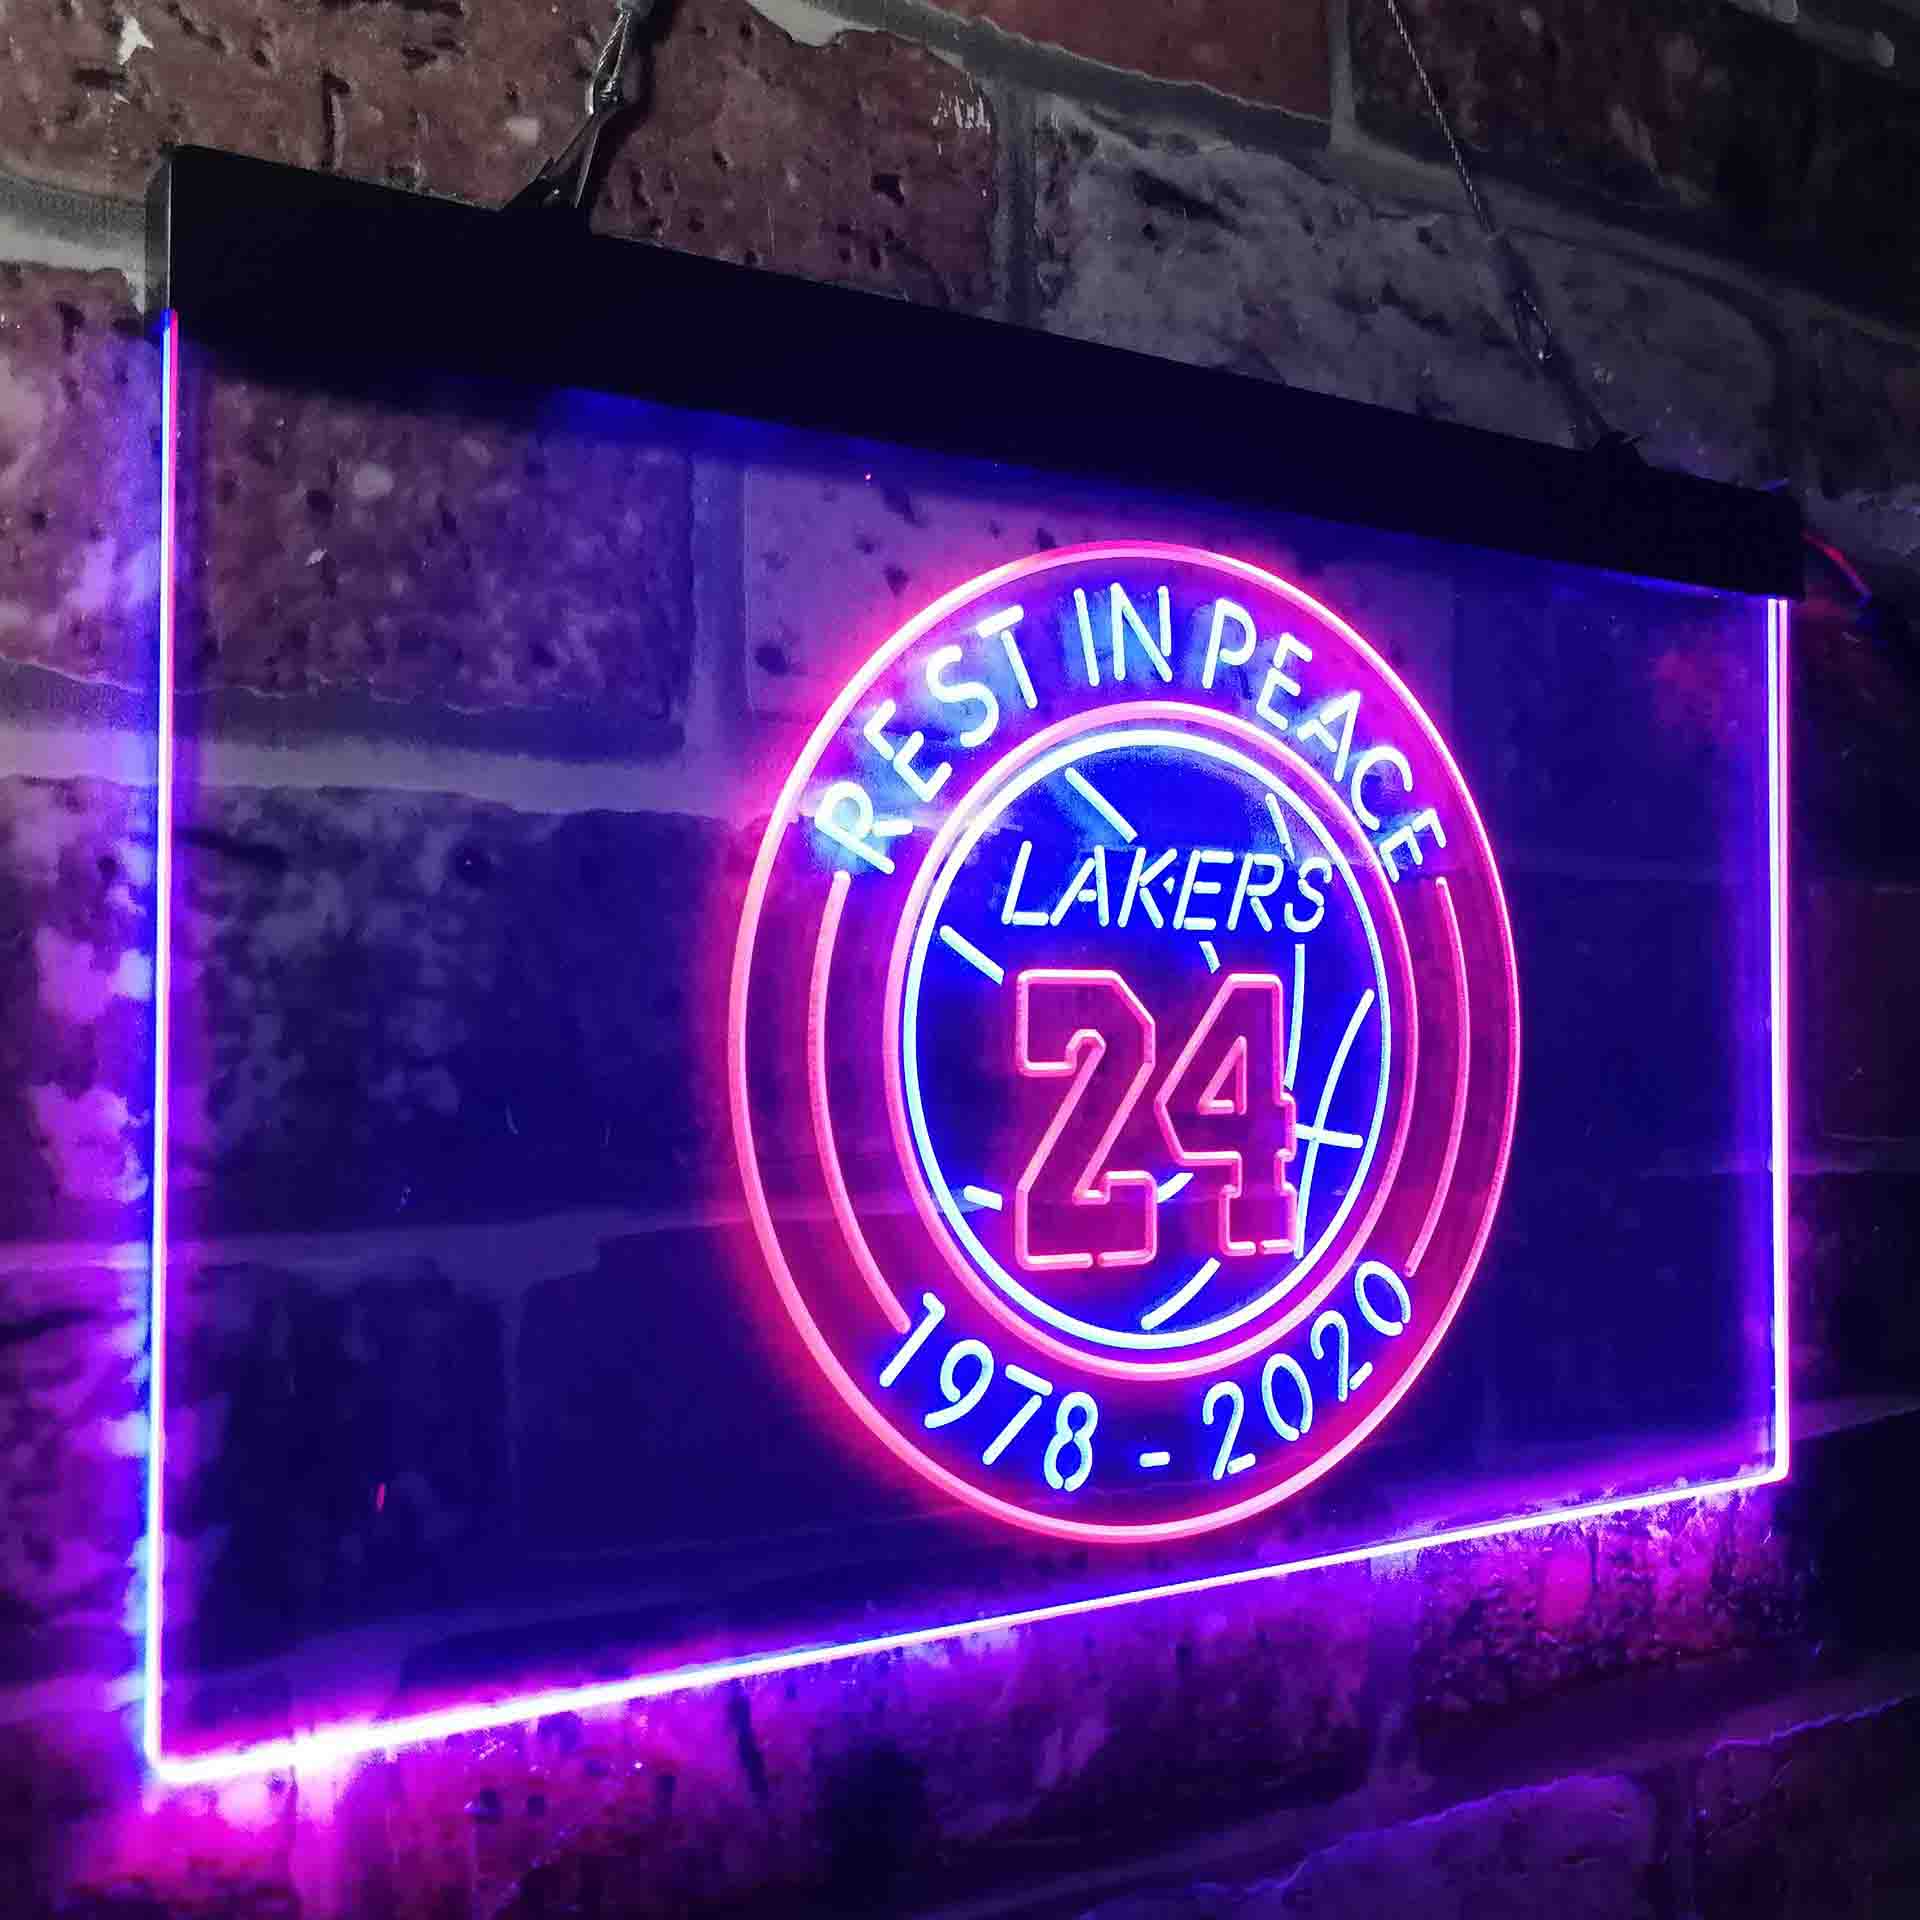 Lakers 24 Rest in Peace 1978-2020 Neon-Like LED Sign